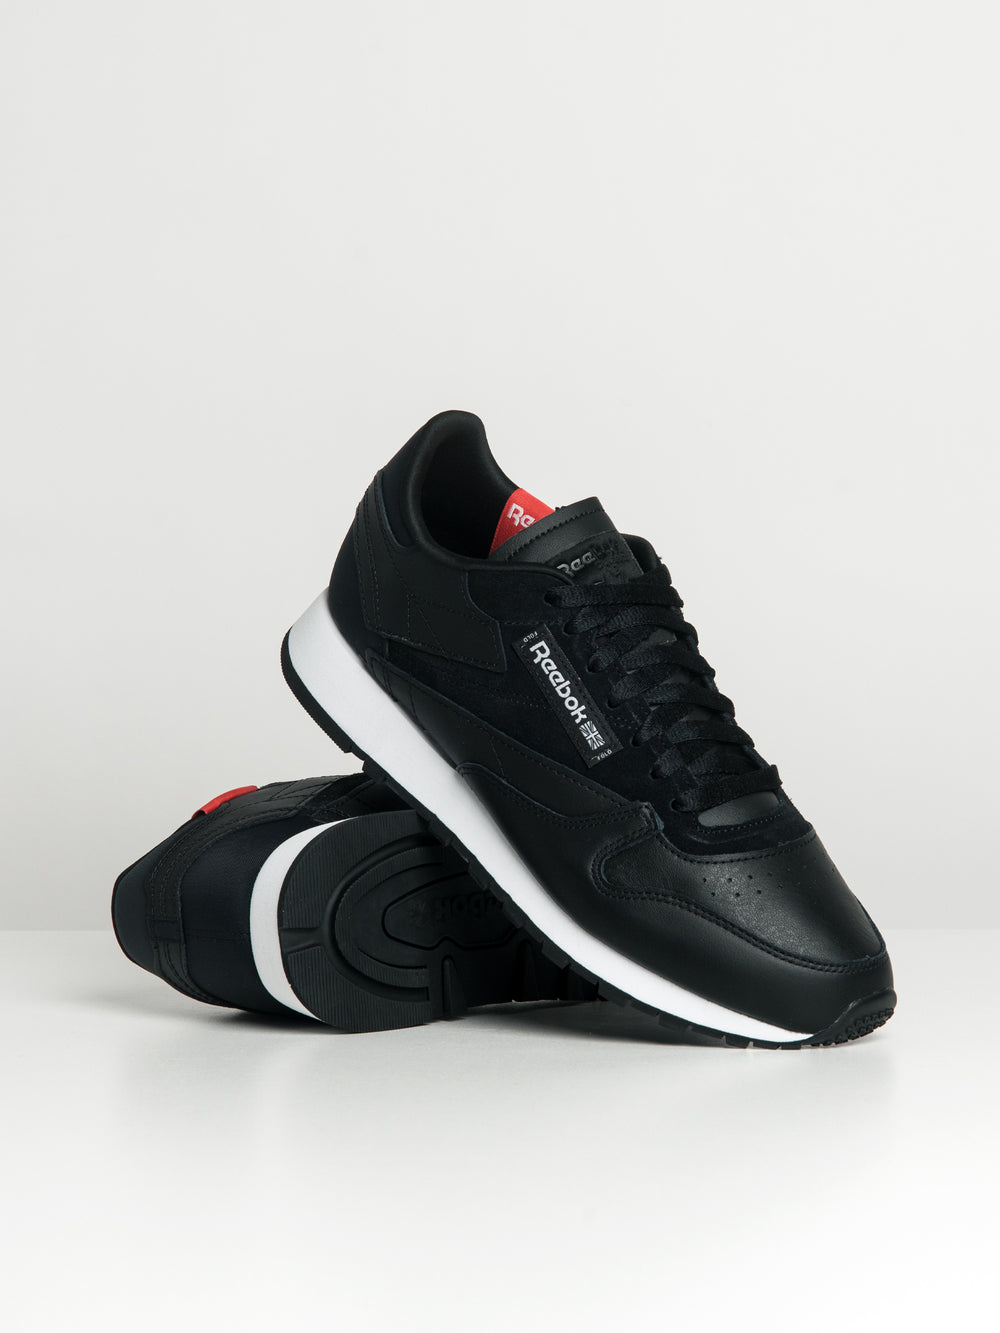 REEBOK CLASSIC LEATHER SNEAKERS MENS - CLEARANCE